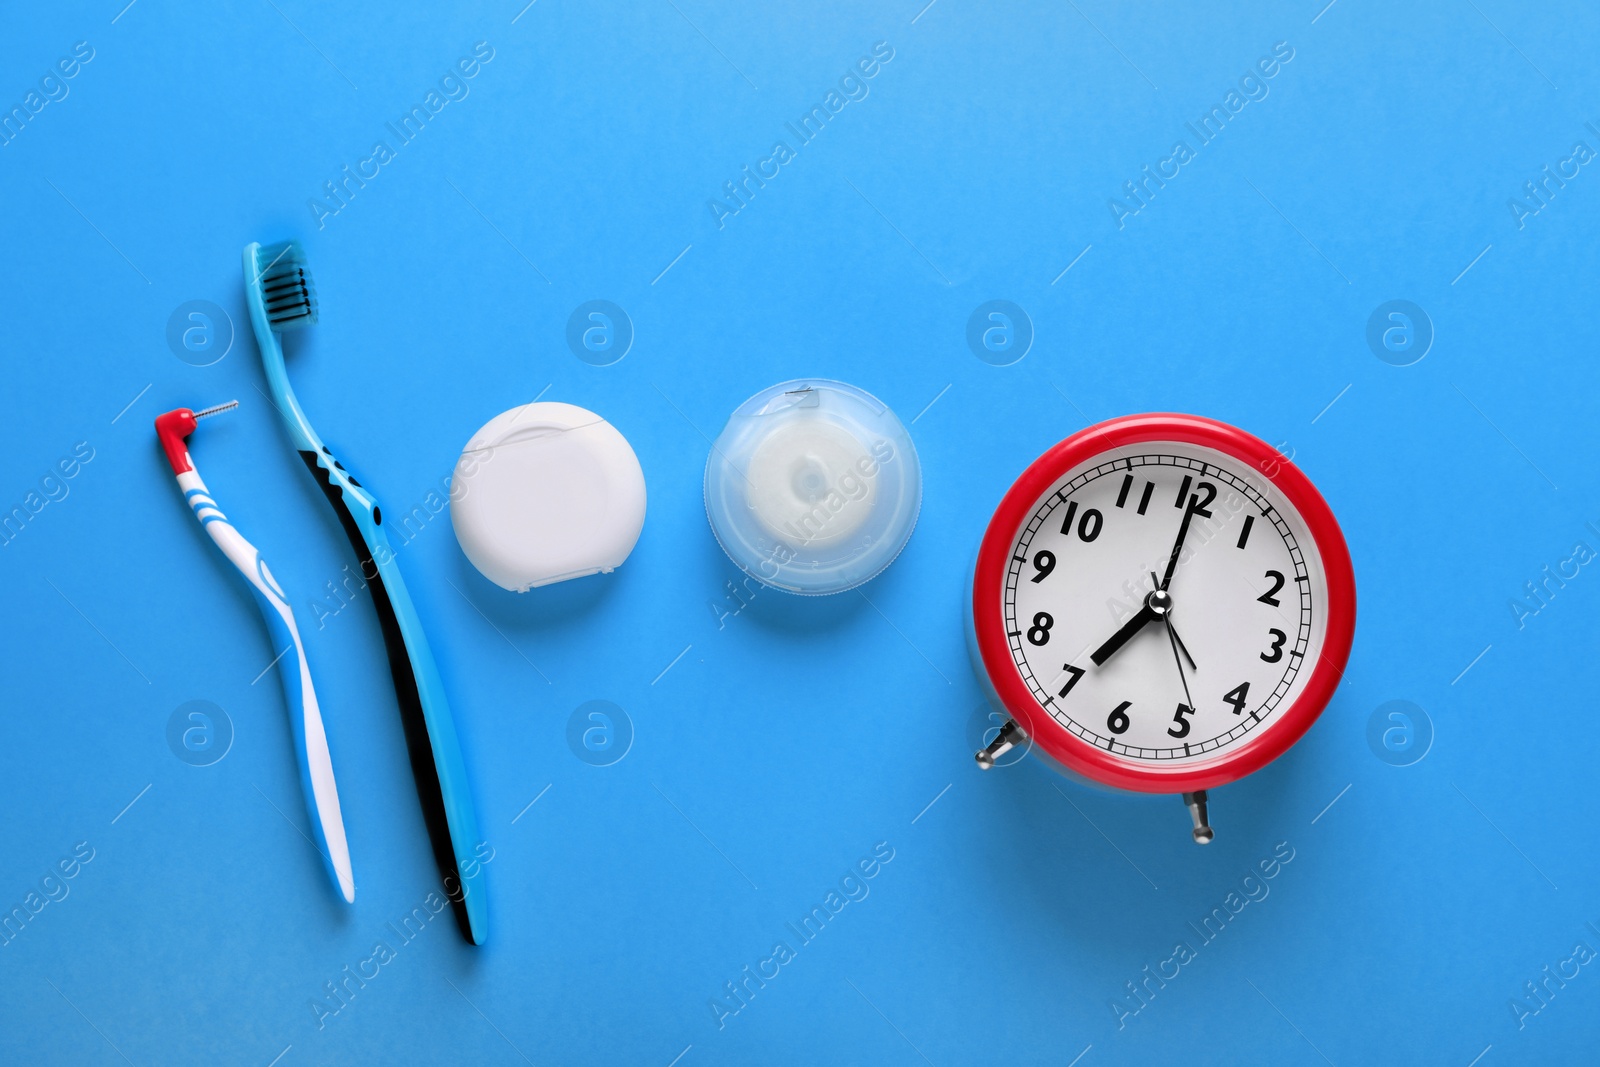 Photo of Containers with dental floss, toothbrushes and alarm clock on light blue background, flat lay